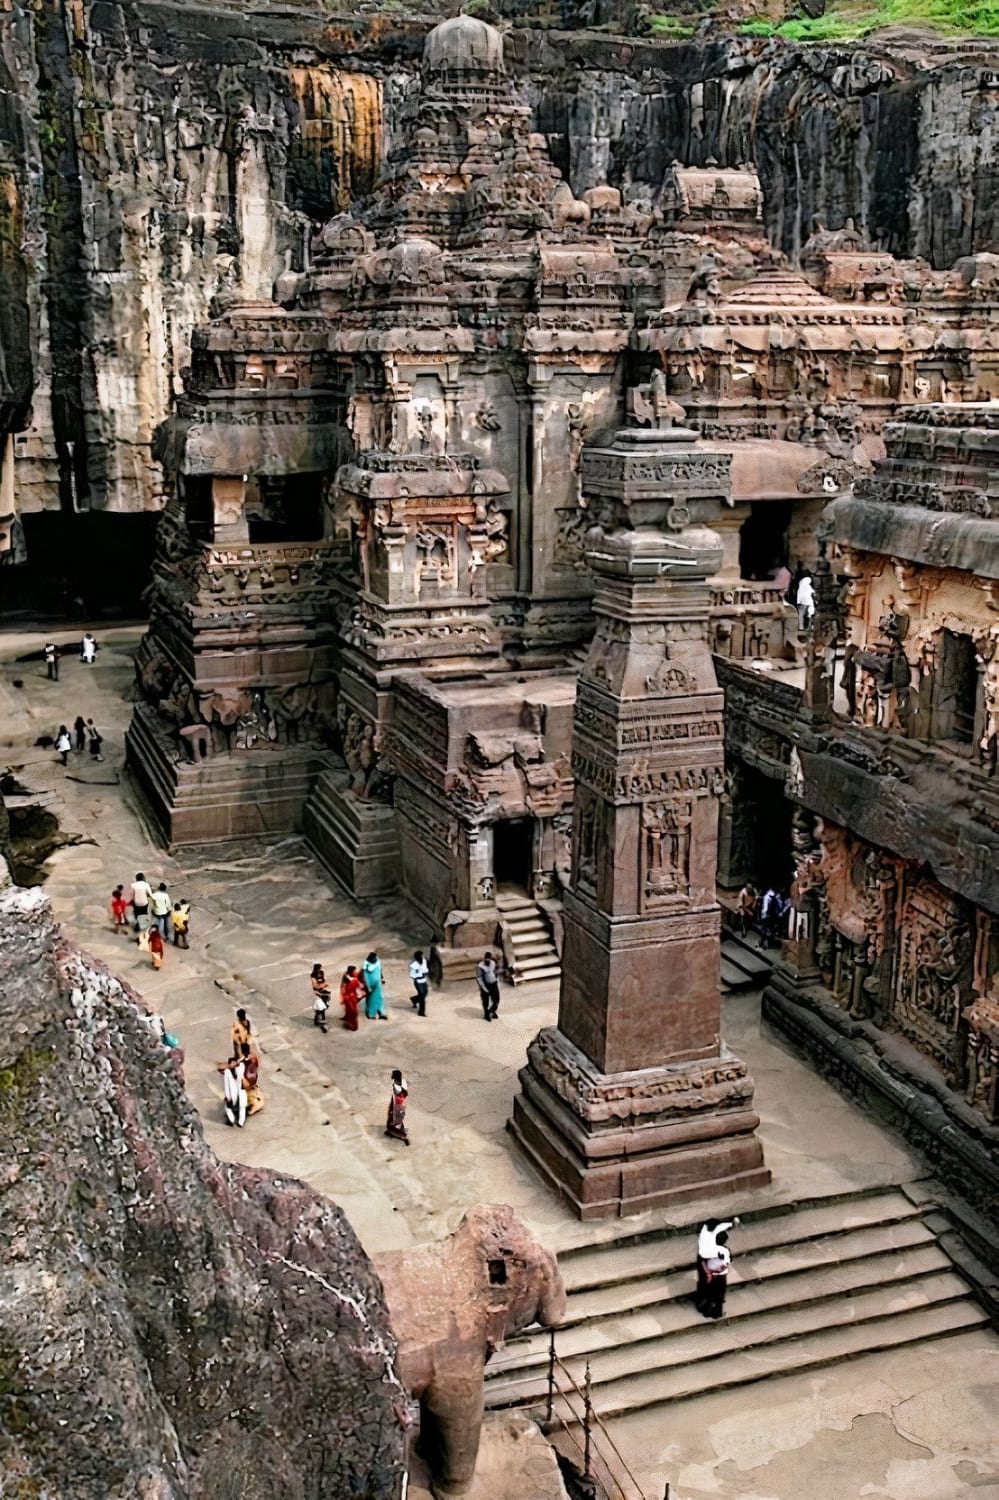 The Kailasa temple in Maharashtra, India. Carved out of one single rock, it is notable for being the largest monolithic structure in the world. Also known as ‘Cave 16’ of the Ellora Caves, the temple was built in the 8th century during the reign of the Rashtrakuta king Krishna I